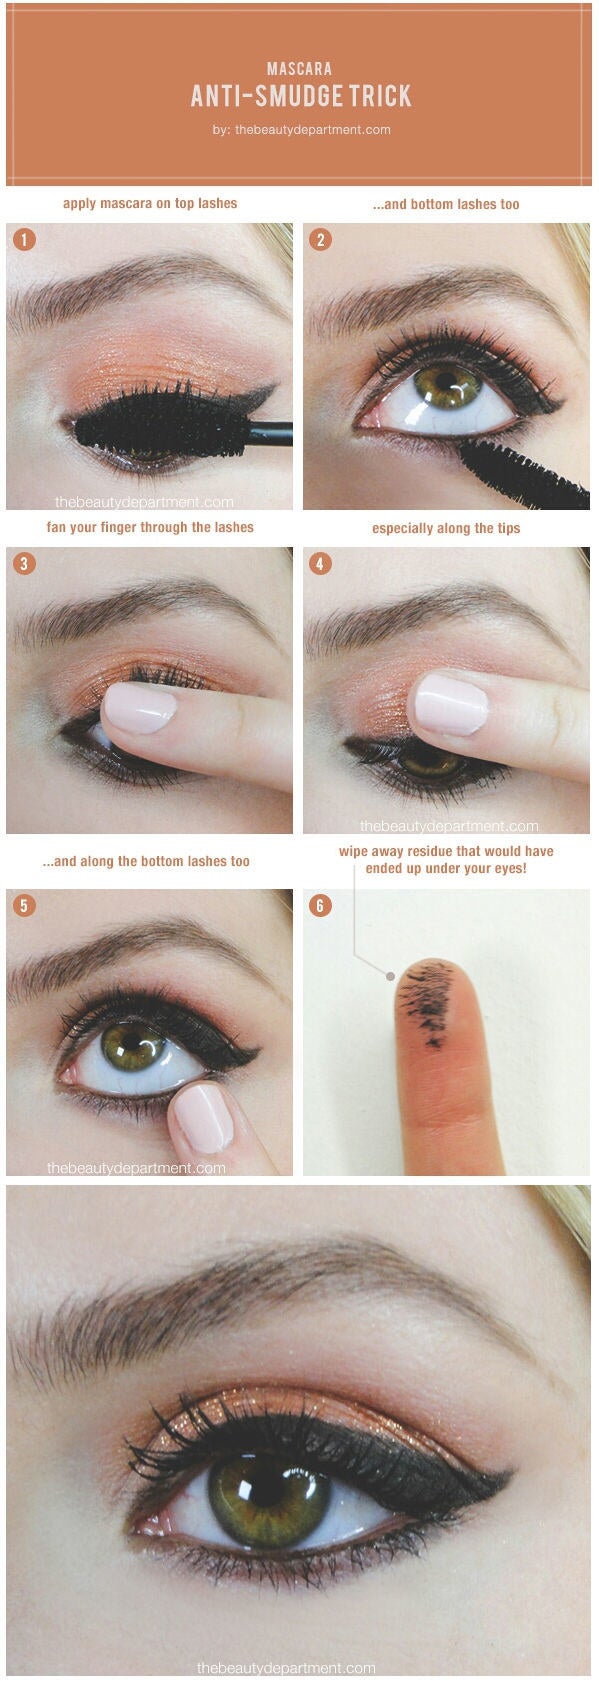 A diagram showing how to do the trick, with a model simply running their fingers along the lower side of the top lashes after applying mascara